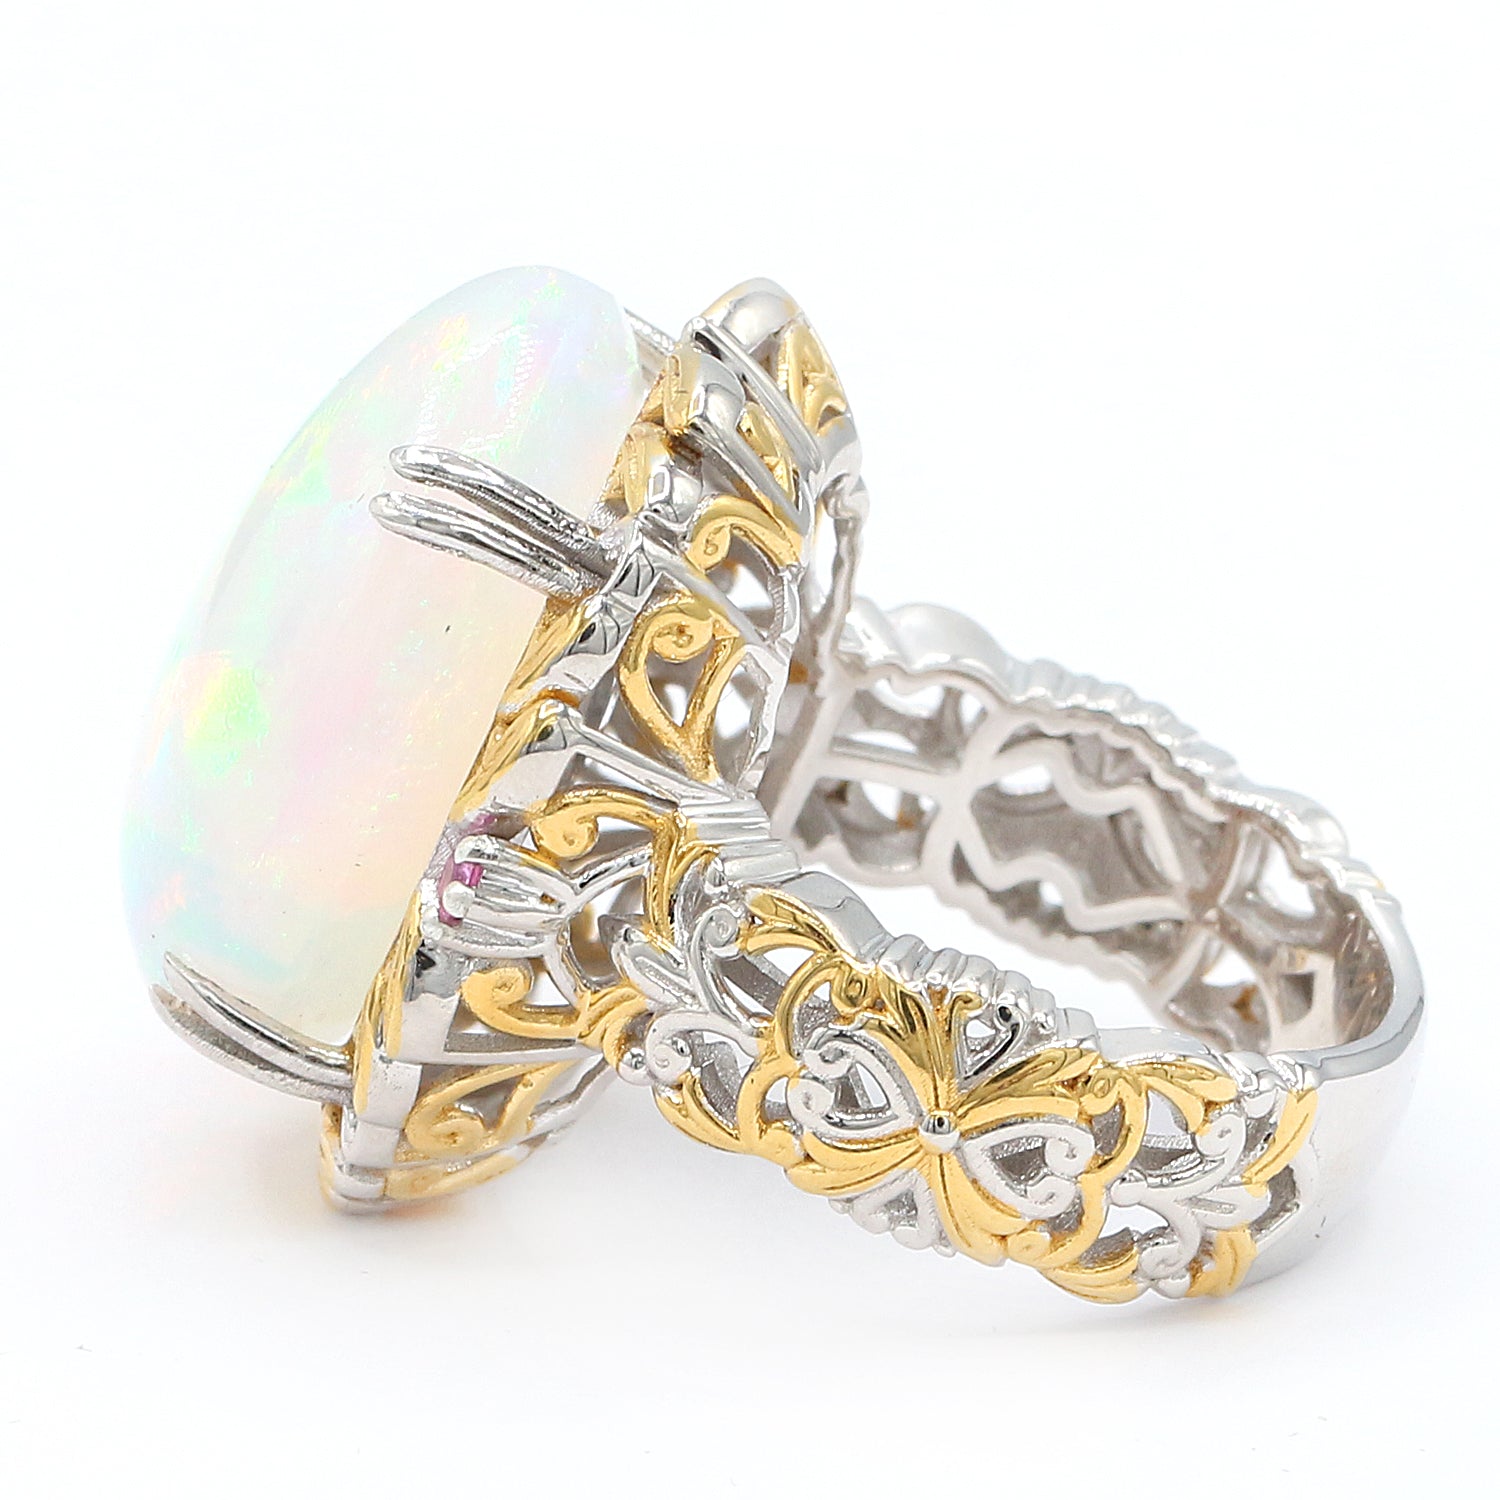 Limited Edition Gems en Vogue Luxe, One-of-a-Kind 16.82ctw Ethiopian Opal & Ruby Ring